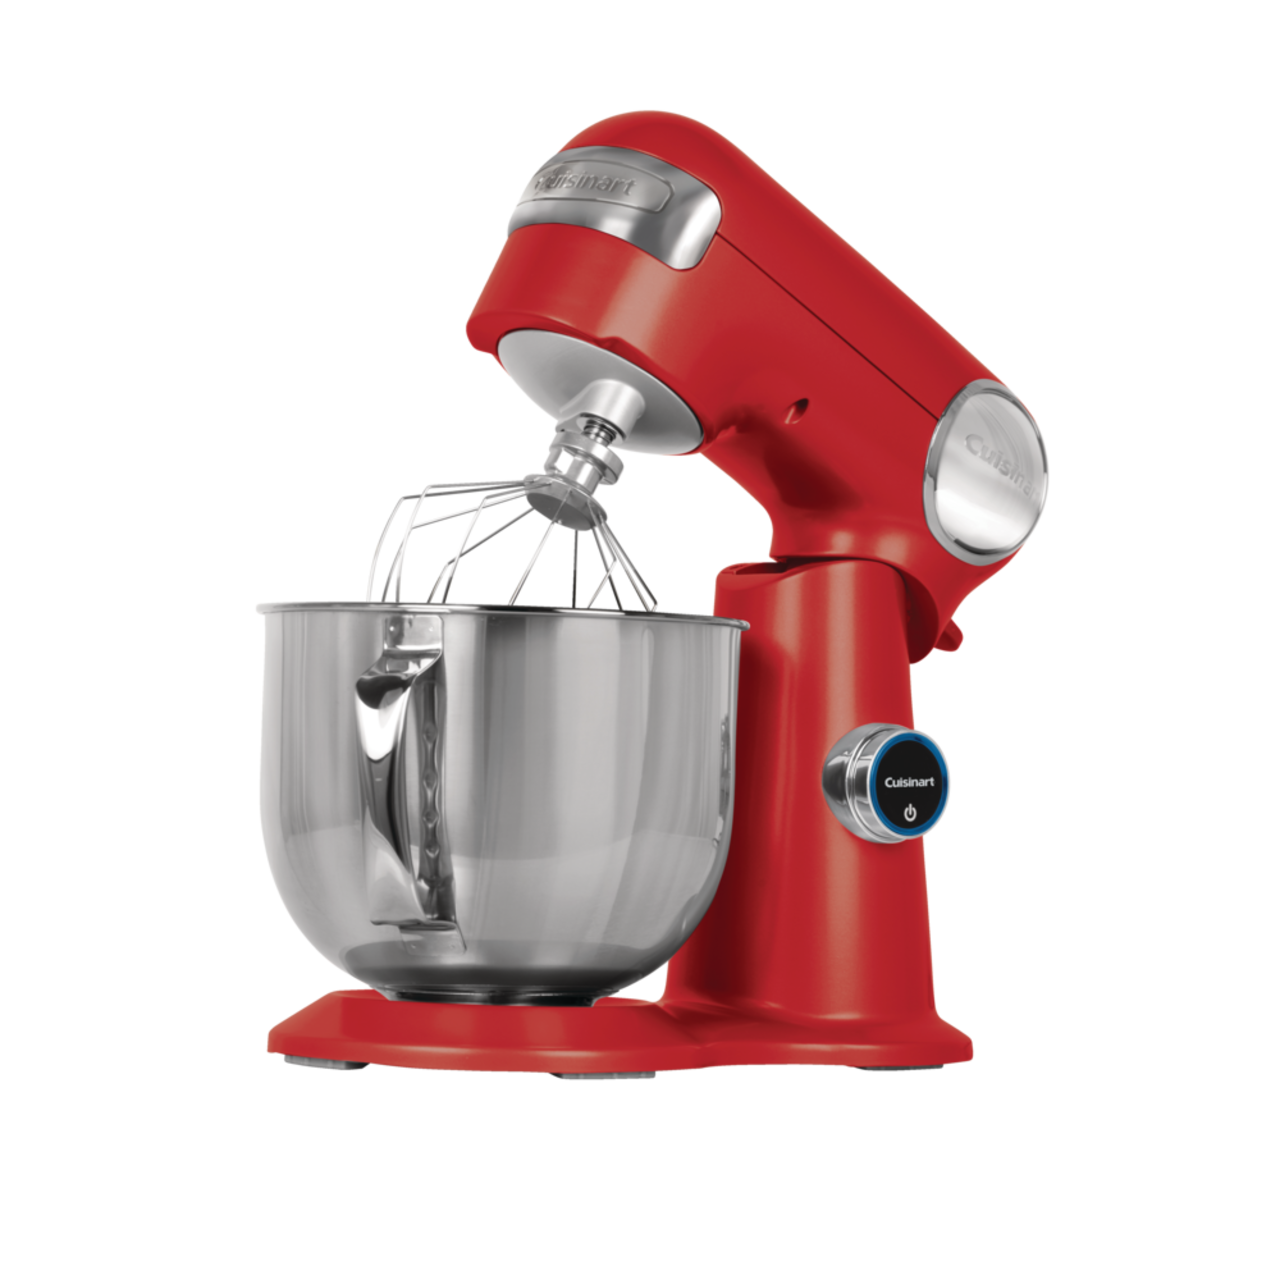 https://media-www.canadiantire.ca/product/living/kitchen/kitchen-appliances/0430775/cuisinart-digital-stand-mixer-red-6e88d572-668b-40dc-a3e1-26a0a2ae4d1f.png?imdensity=1&imwidth=640&impolicy=mZoom